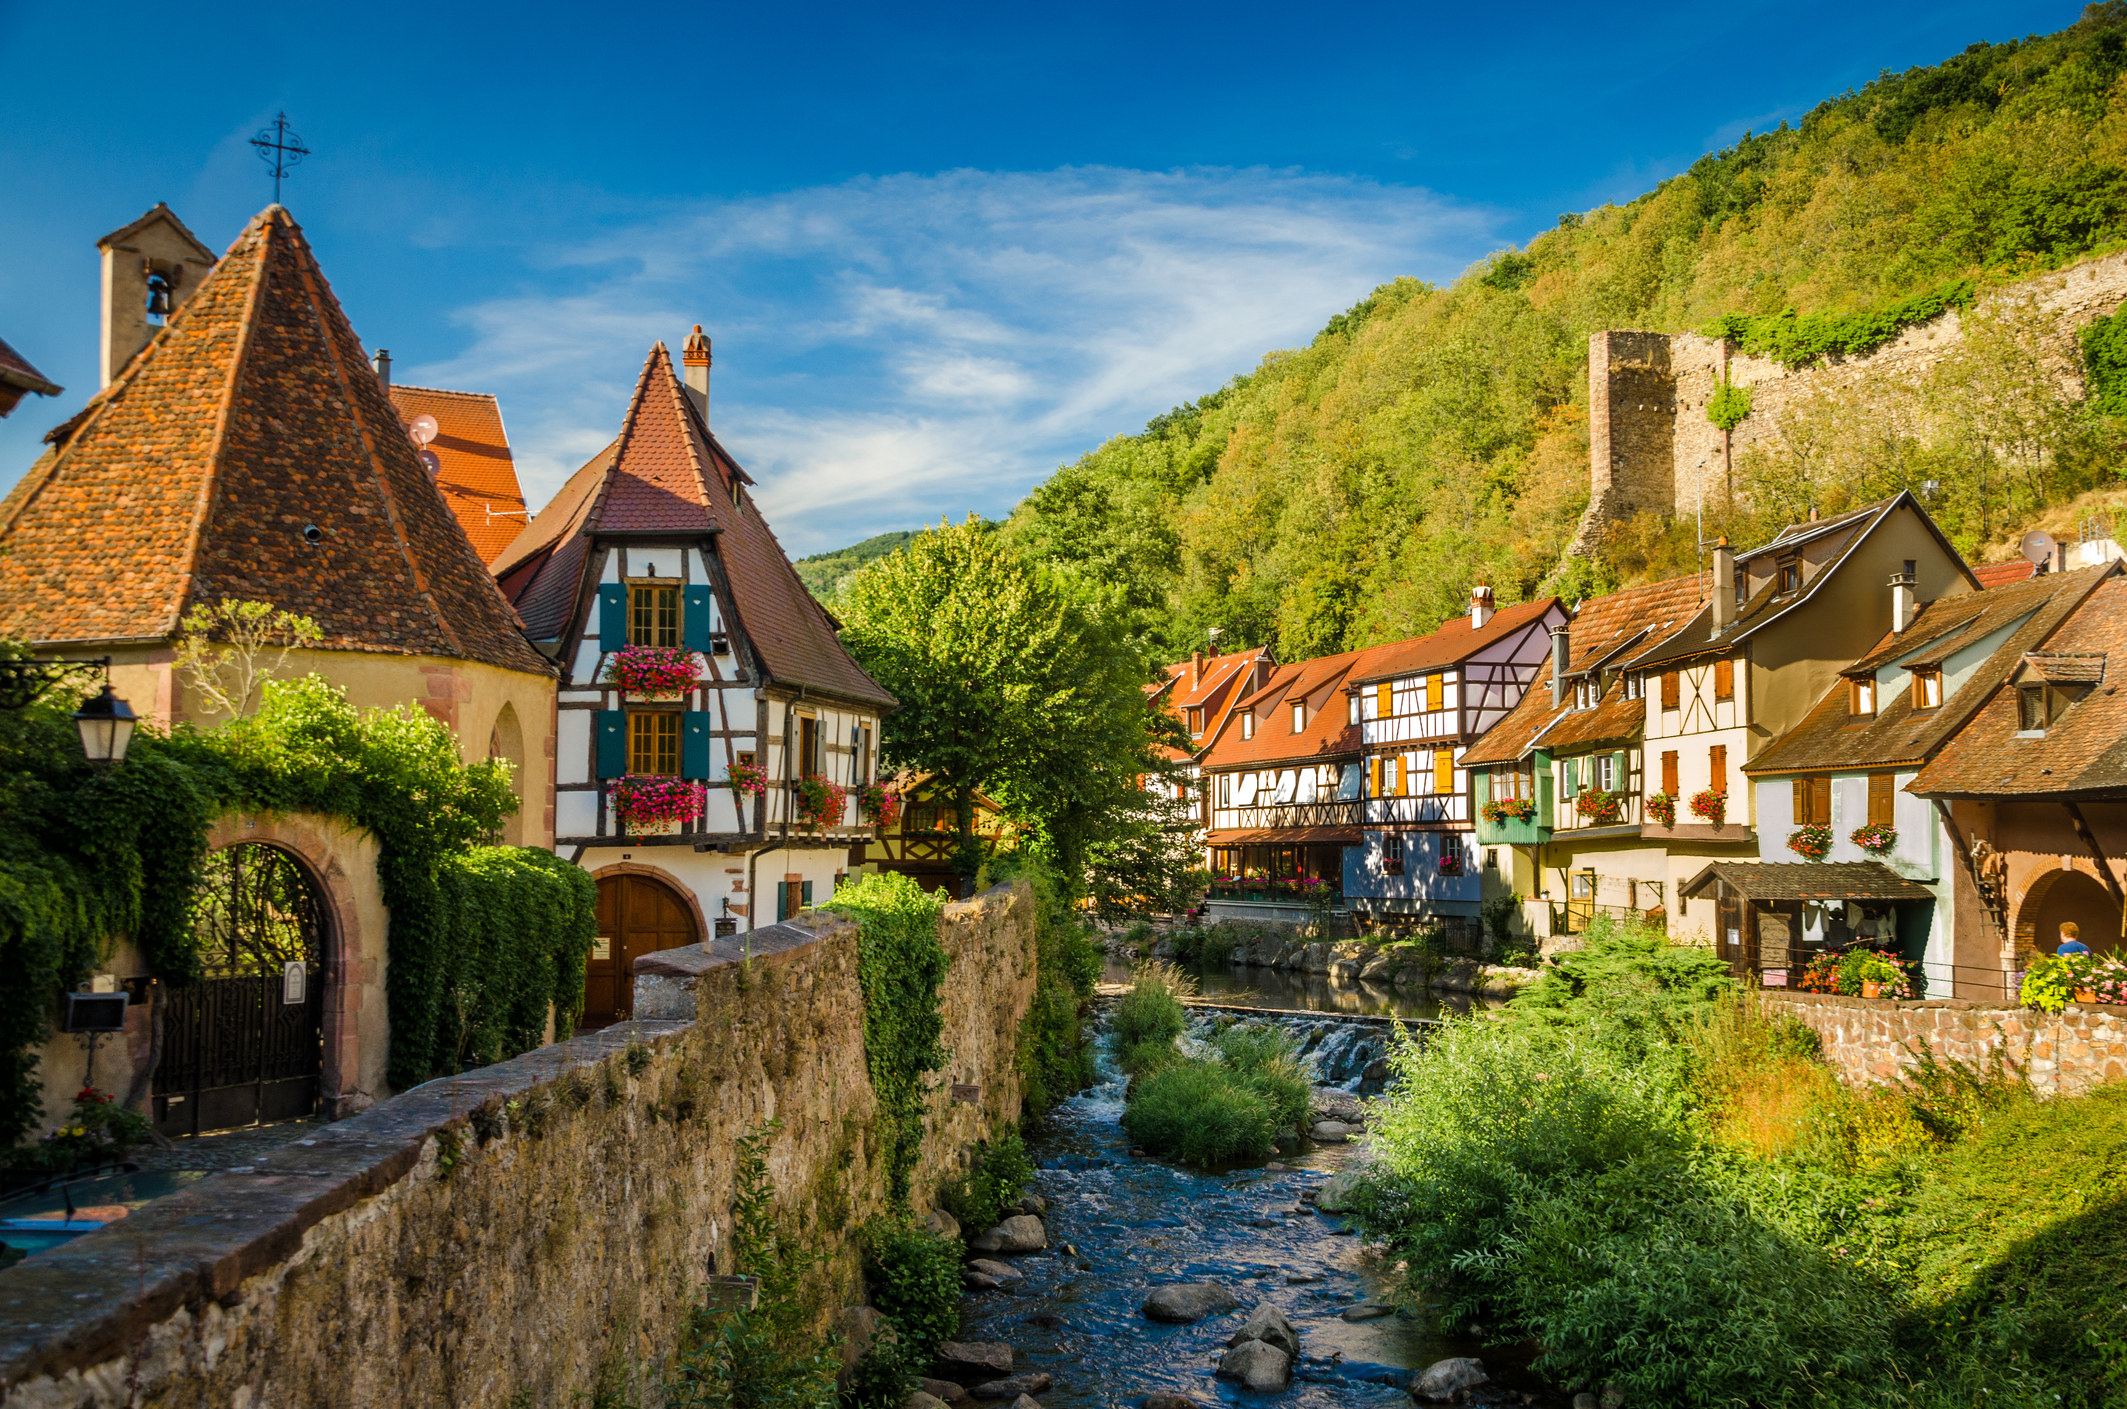 Timber houses in Alsace, France.